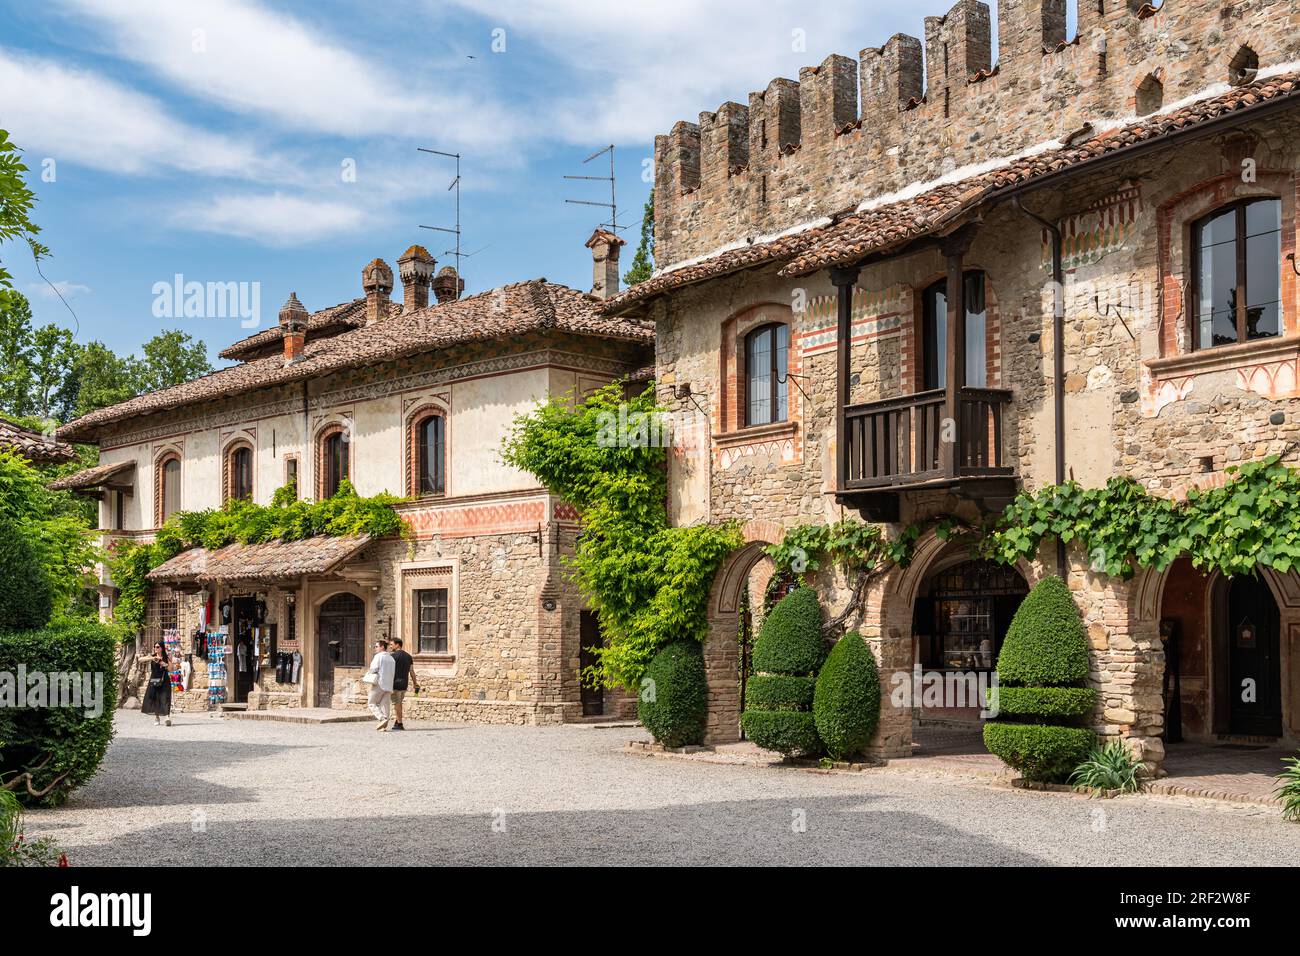 The picturesque village of Grazzano Visconti, entirely built in medieval style in 20th century, Emilia-Romagna, Italy Stock Photo